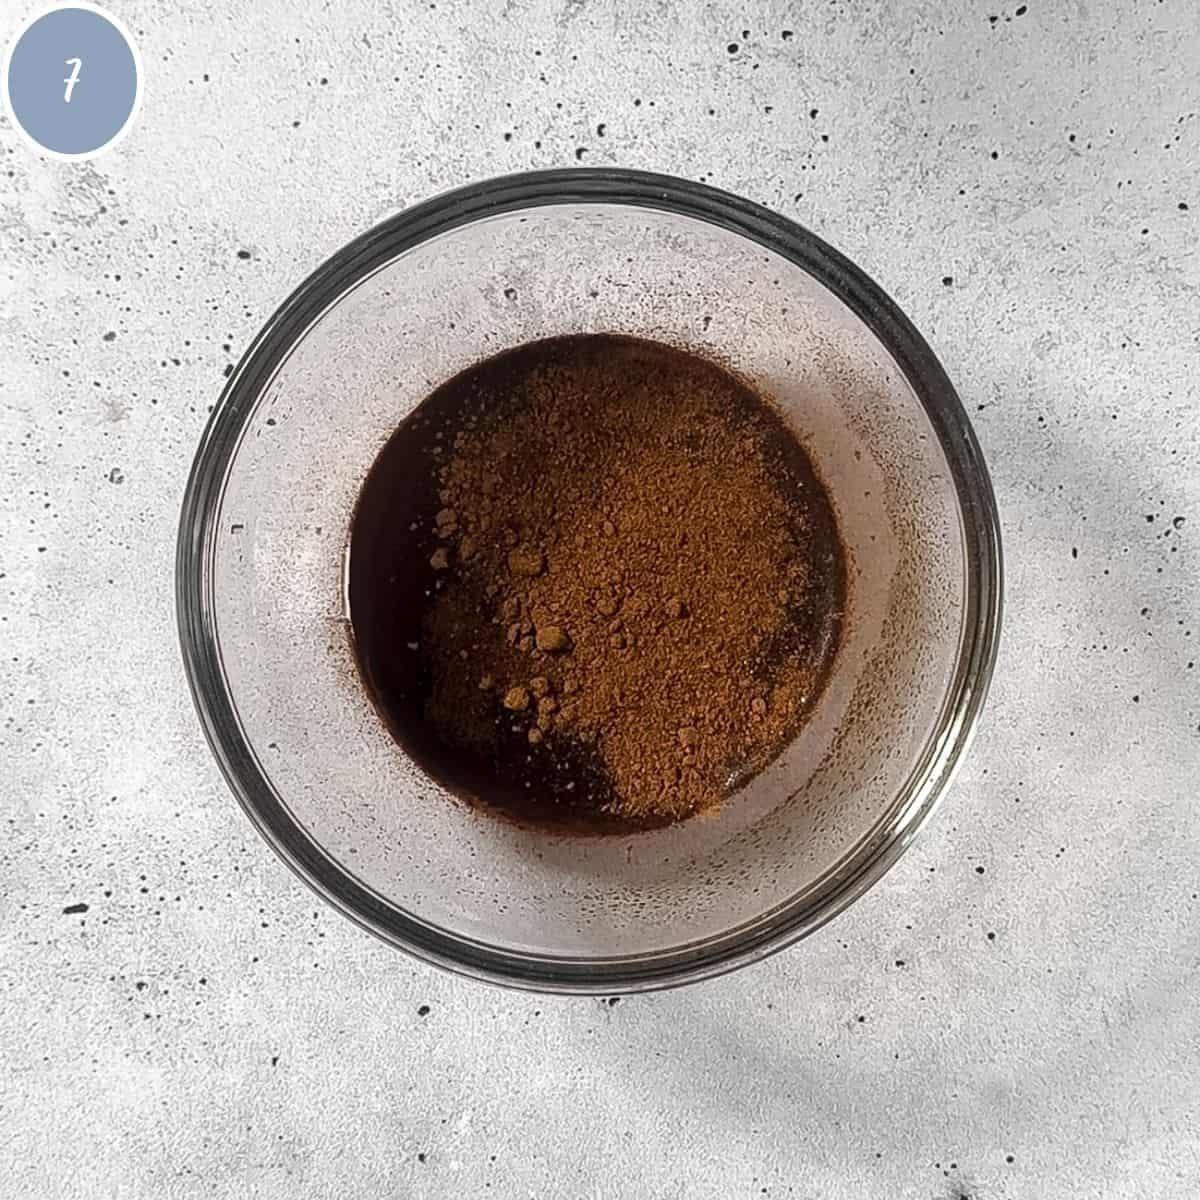 Hot water in a bowl with espresso powder and nutmeg.